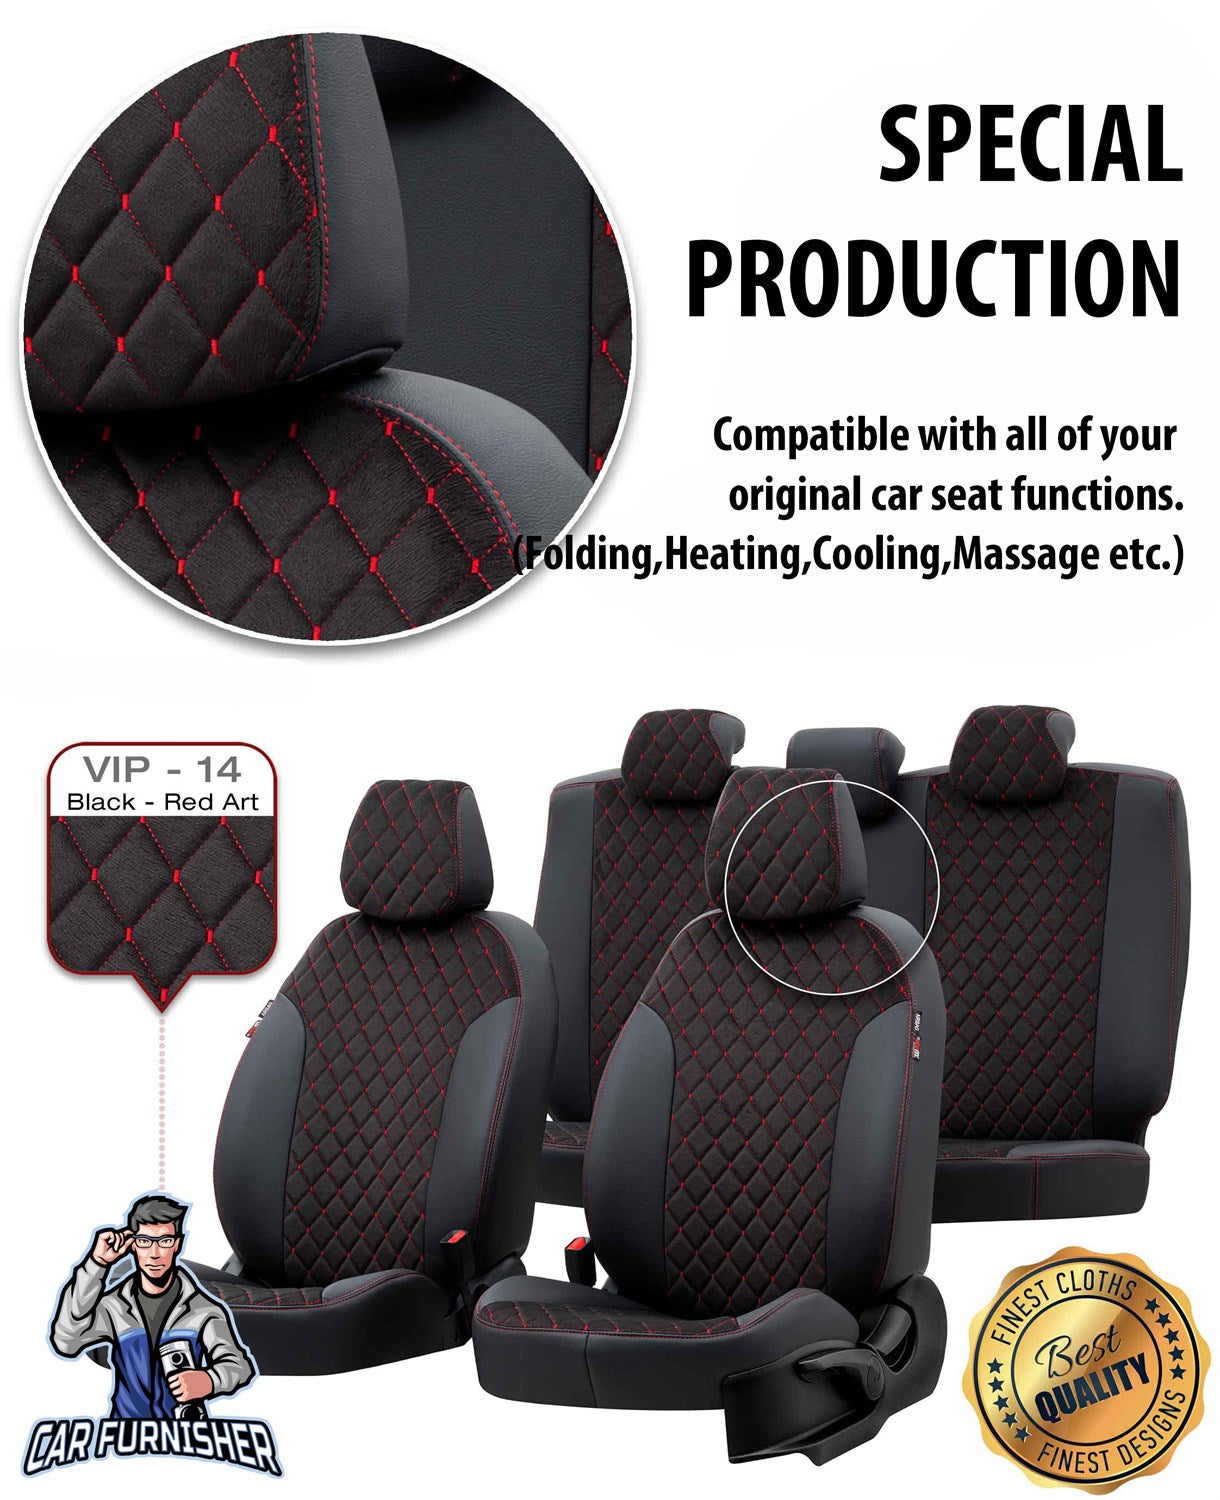 Tata Xenon Seat Covers Madrid Foal Feather Design Smoked Leather & Foal Feather